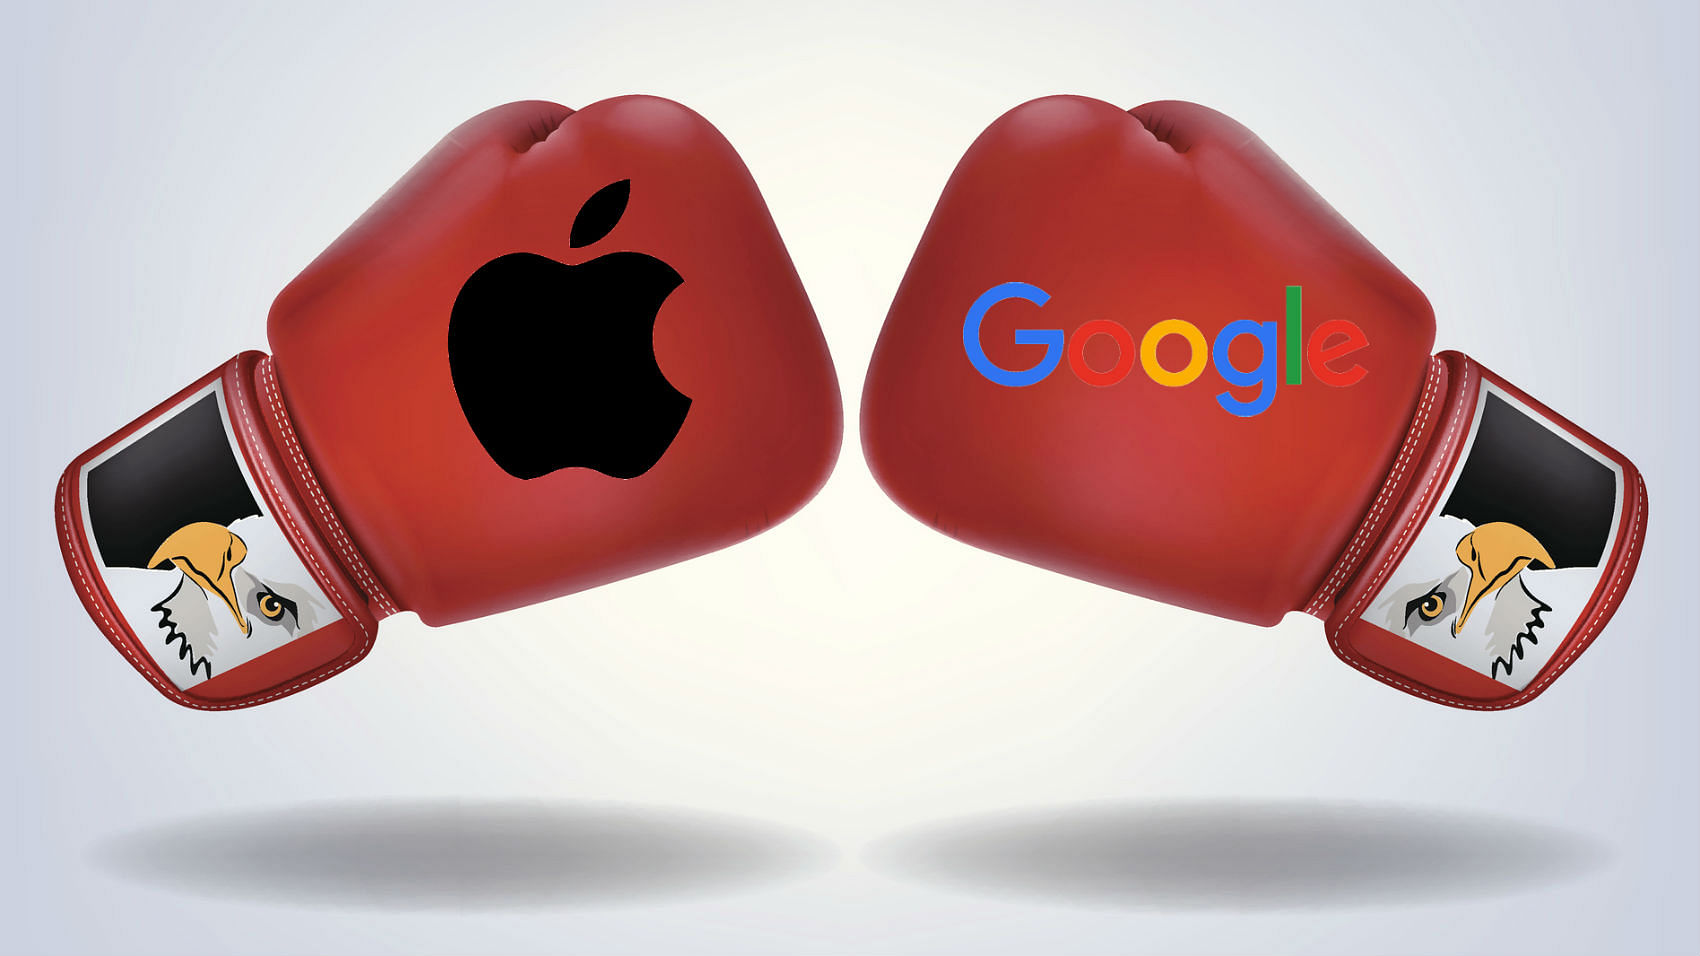 The brand battle between Google and Apple has spiced up in recent times. (Photo: <b>The Quint</b>)